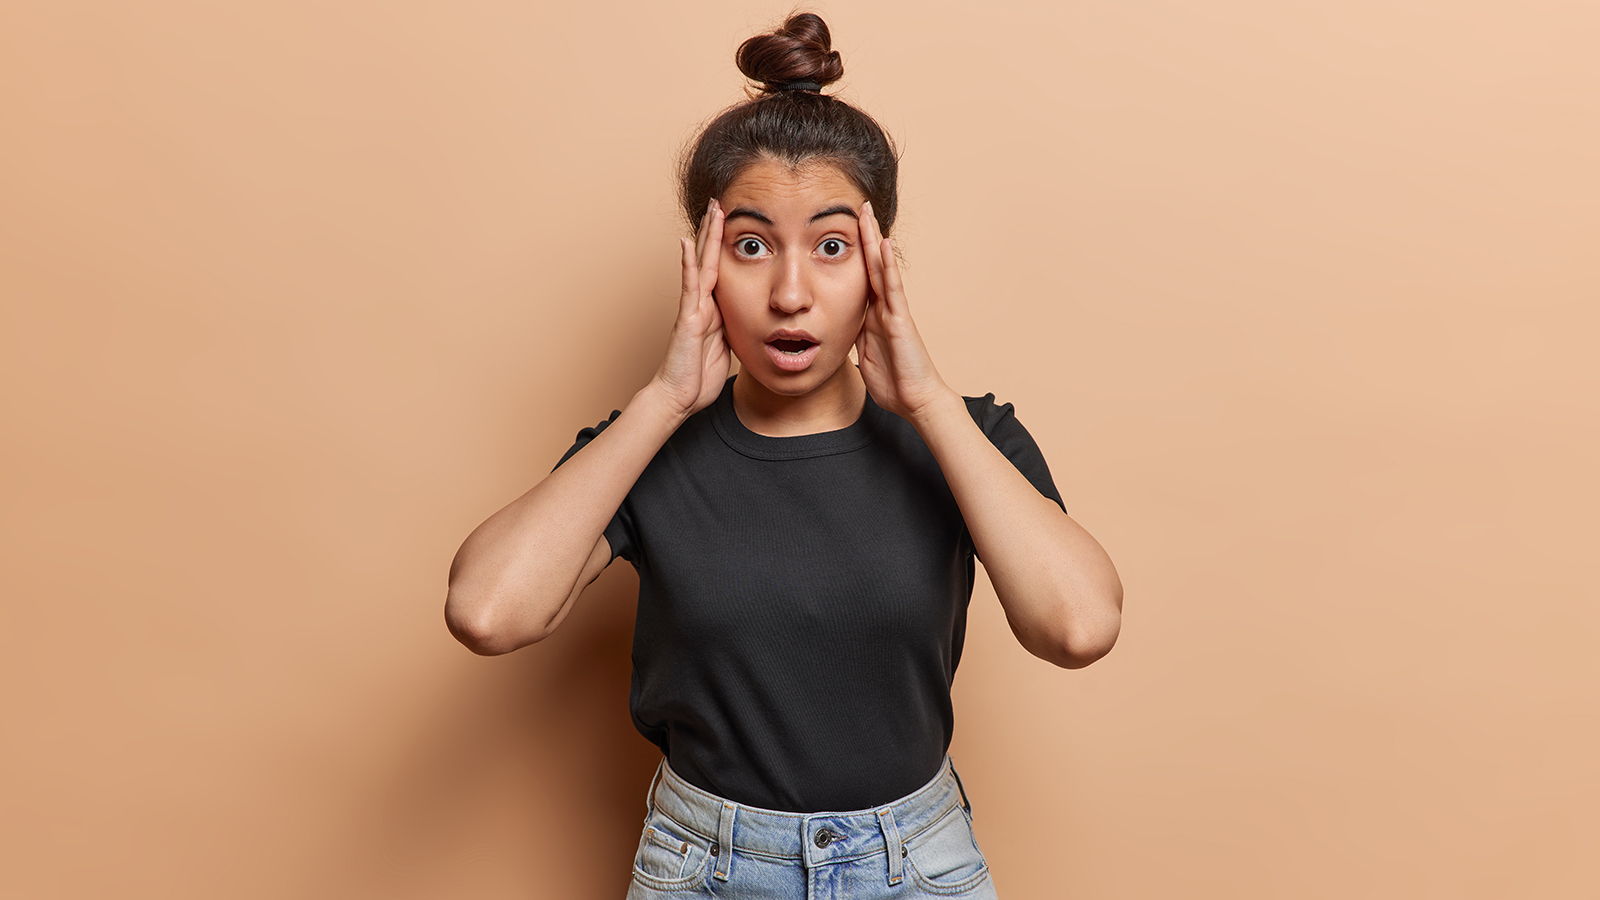 Concerned shocked Latin woman gasping with open mouth keeps hands on temples feels worried has big problems sees no way out wears black t shirt and jeans isolated over brown background. Omg concept